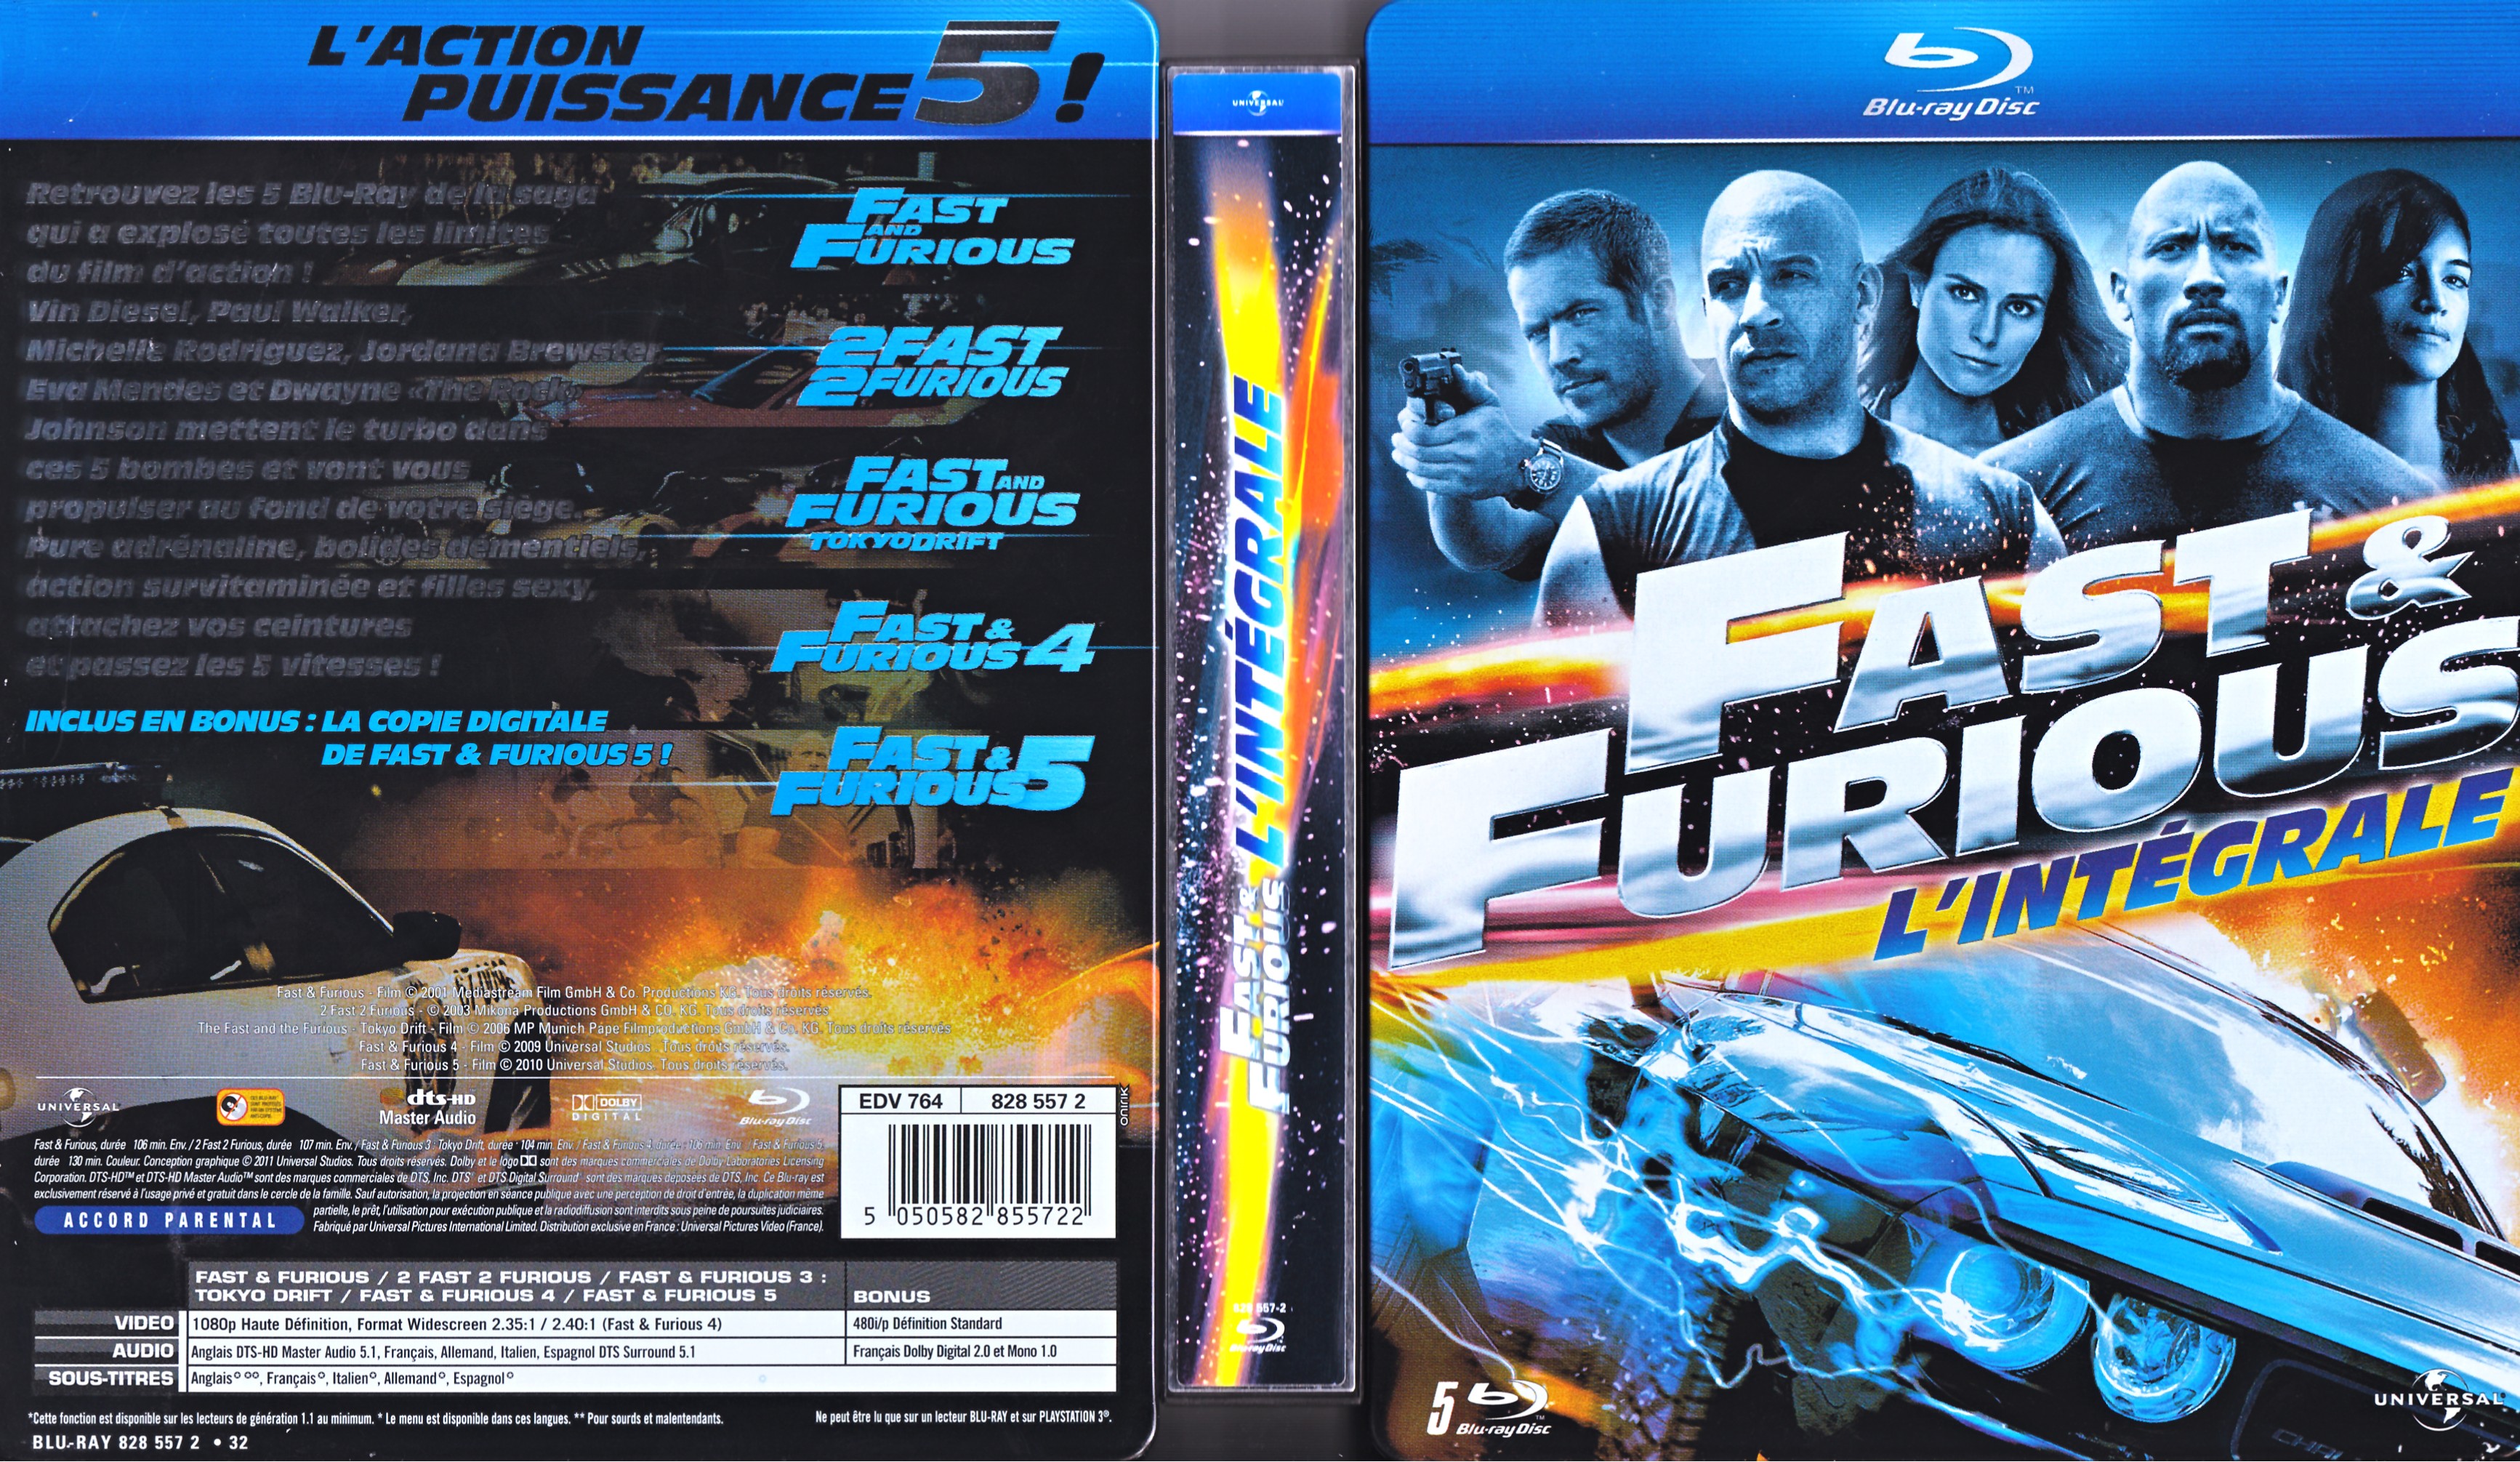 Jaquette DVD Fast and furious Integrale (BLU-RAY)